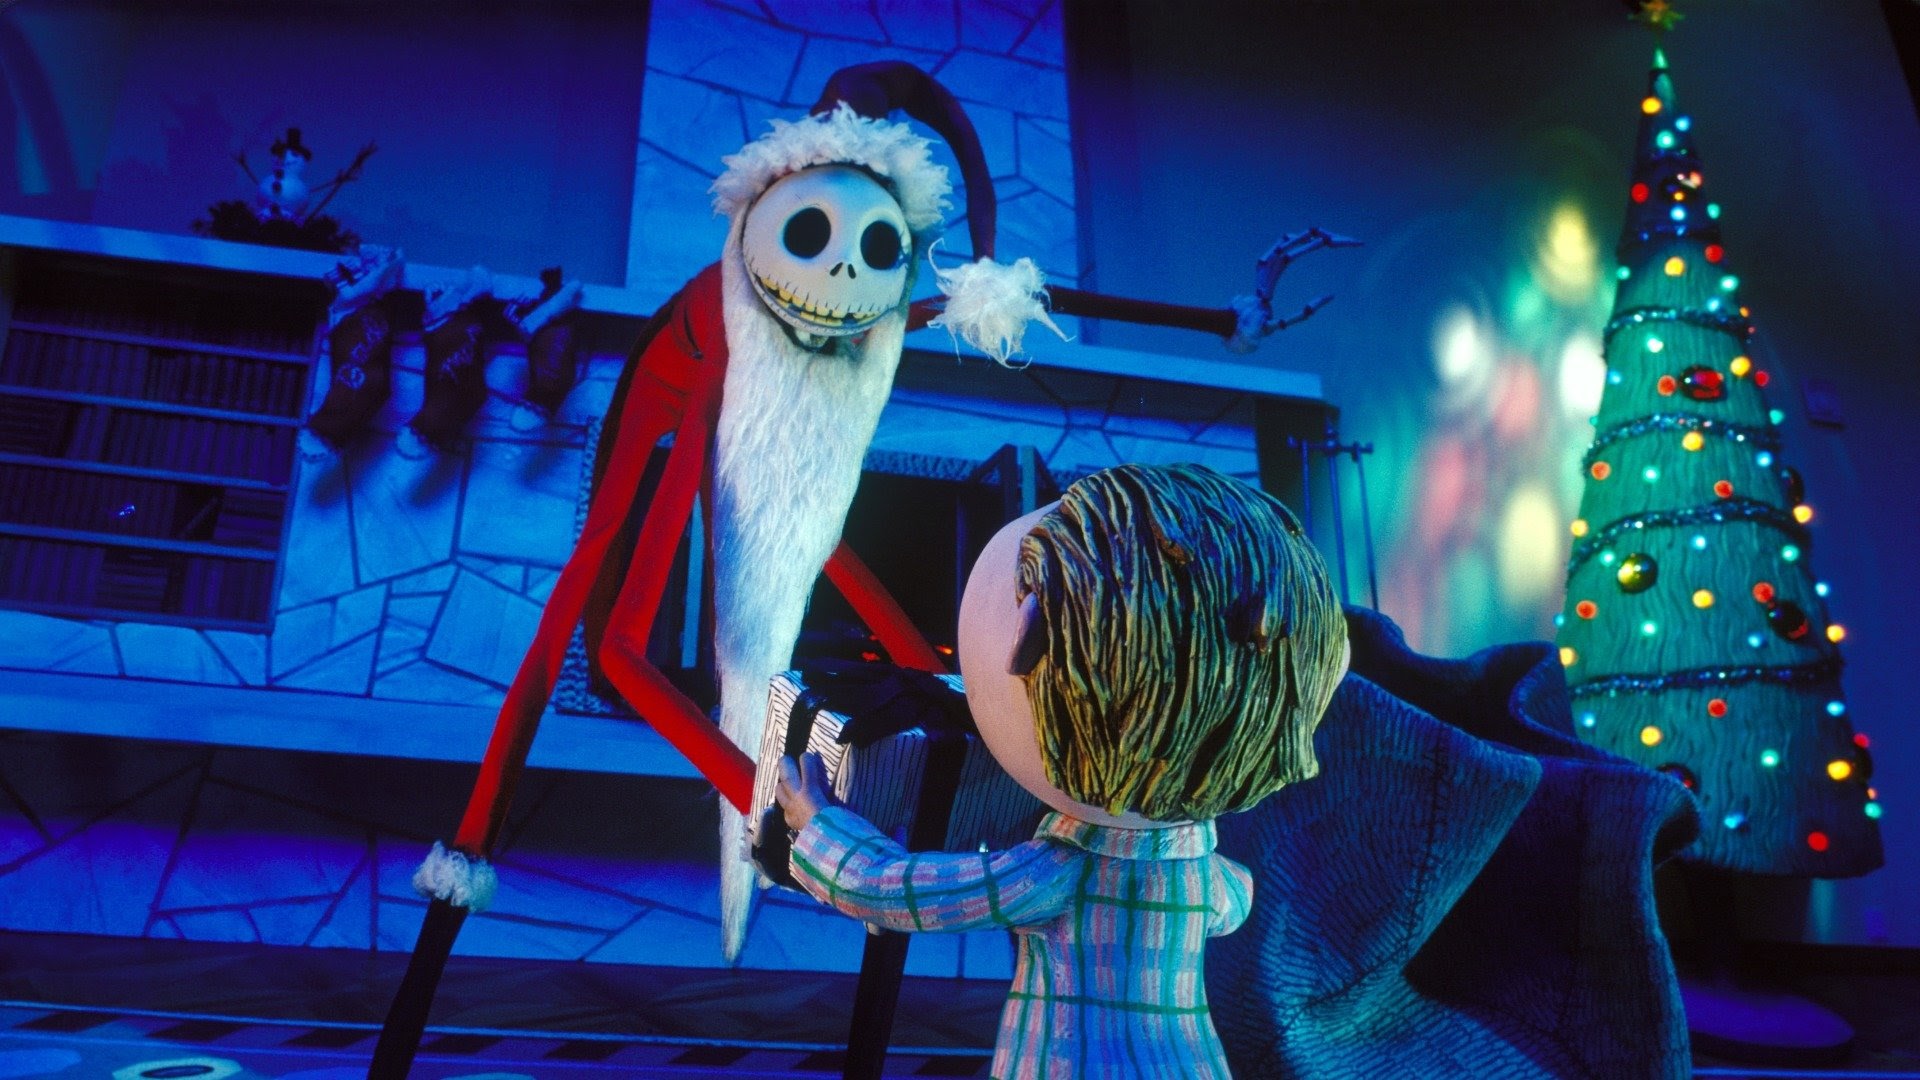 The nightmare before christmas